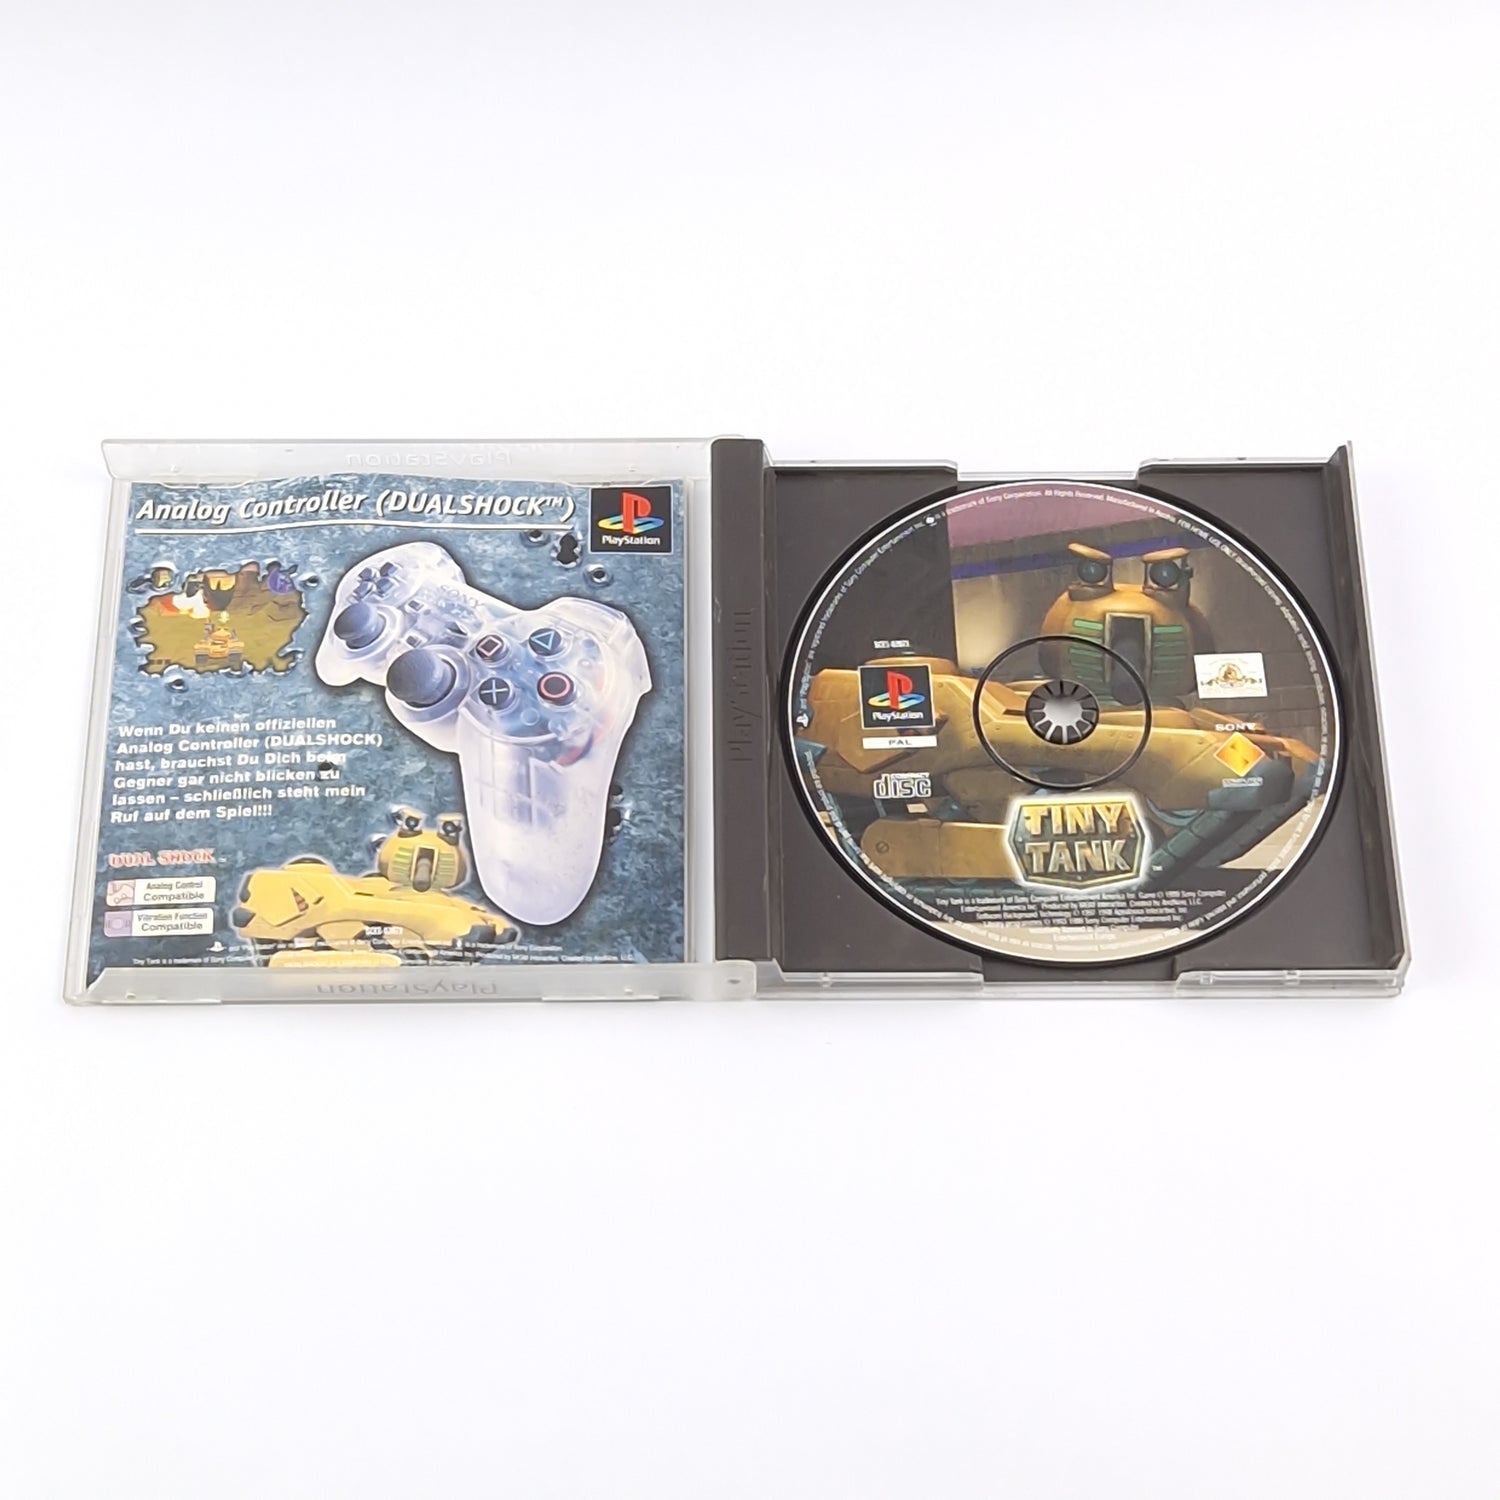 Sony Playstation 1 game: Tiny Tank - original packaging without instructions - PS1 PSX PAL